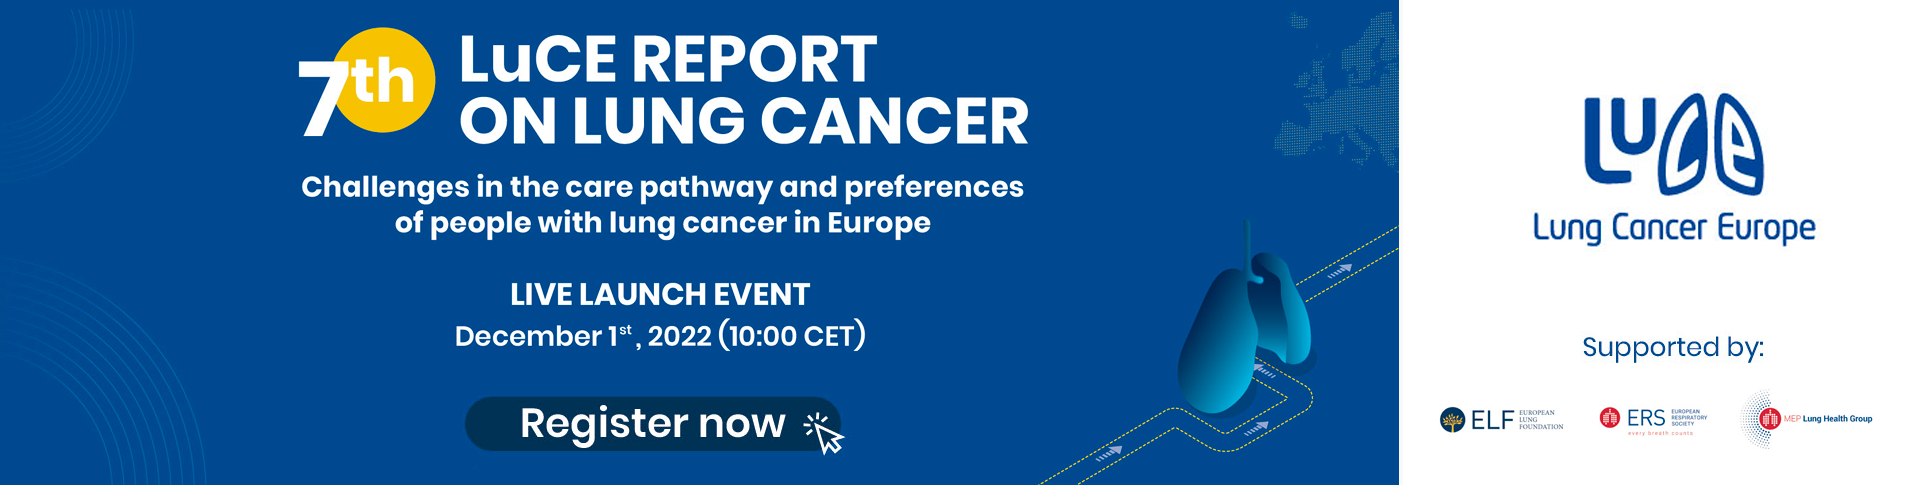 7th LuCE Report on Lung Cancer Live Launch Event